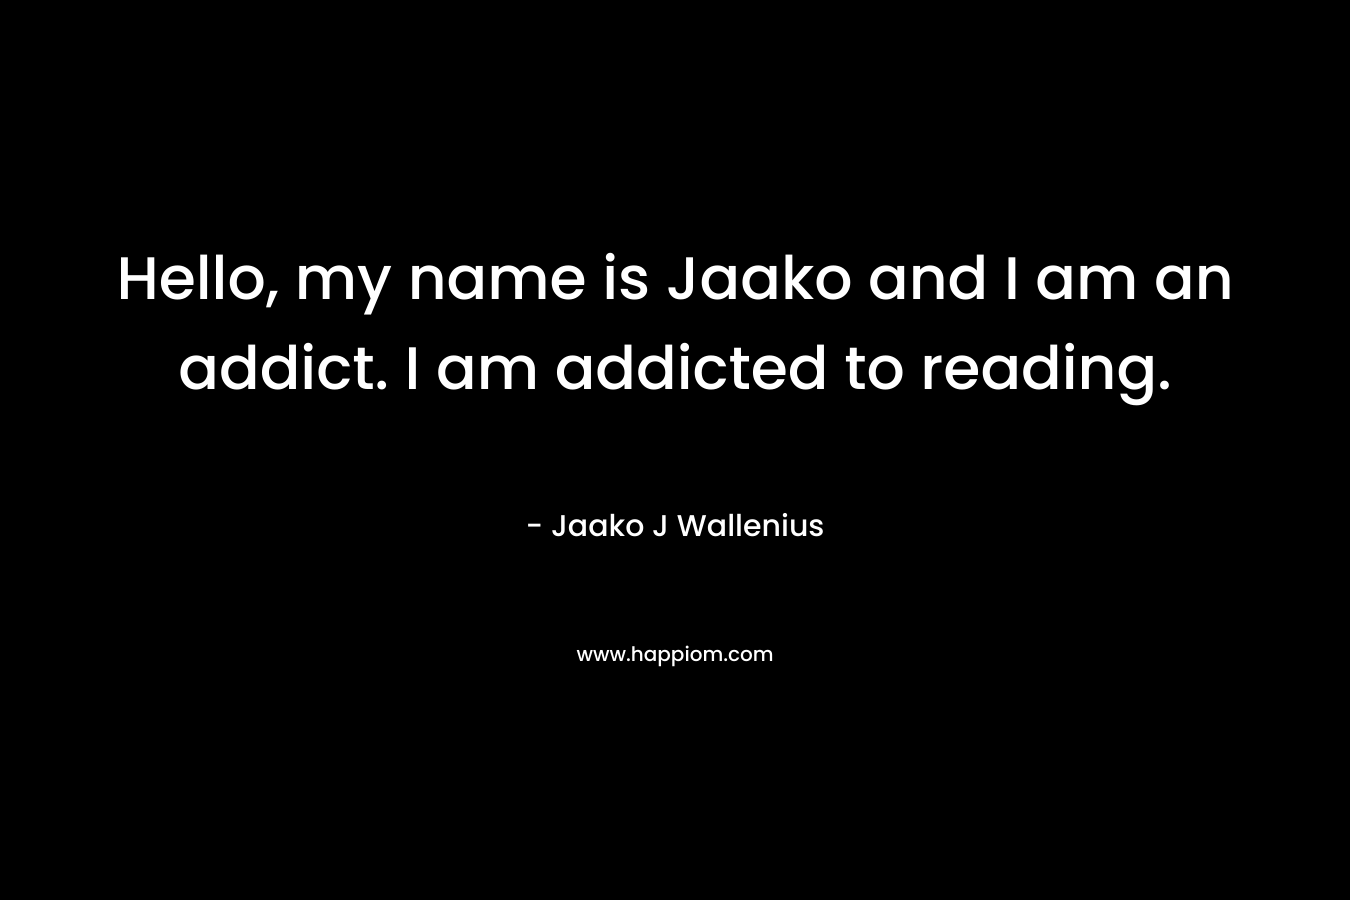 Hello, my name is Jaako and I am an addict. I am addicted to reading. – Jaako J Wallenius